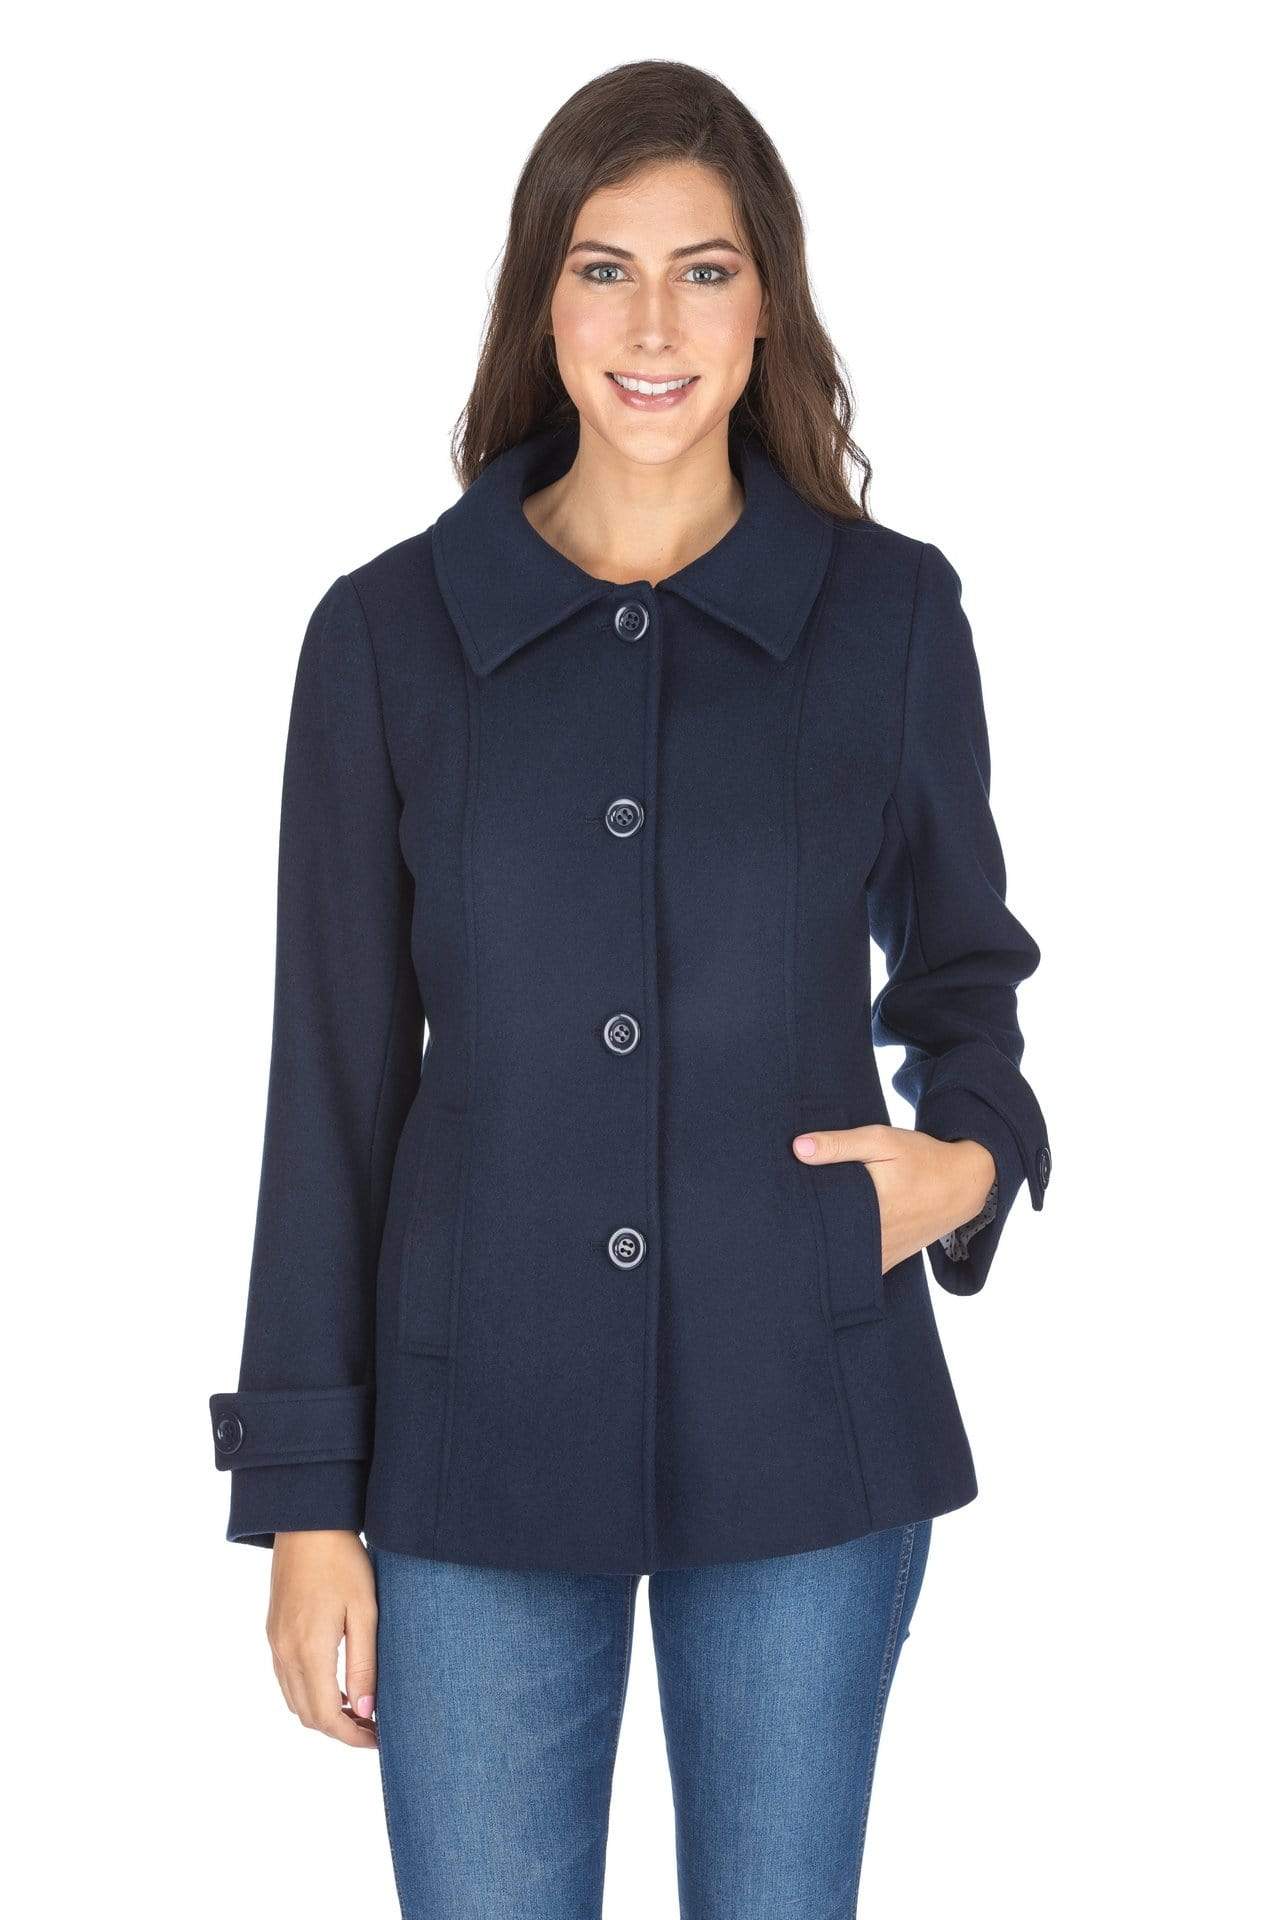 Haute Edition Women's Short Length Wool Blend Car Coat with Free Scarf